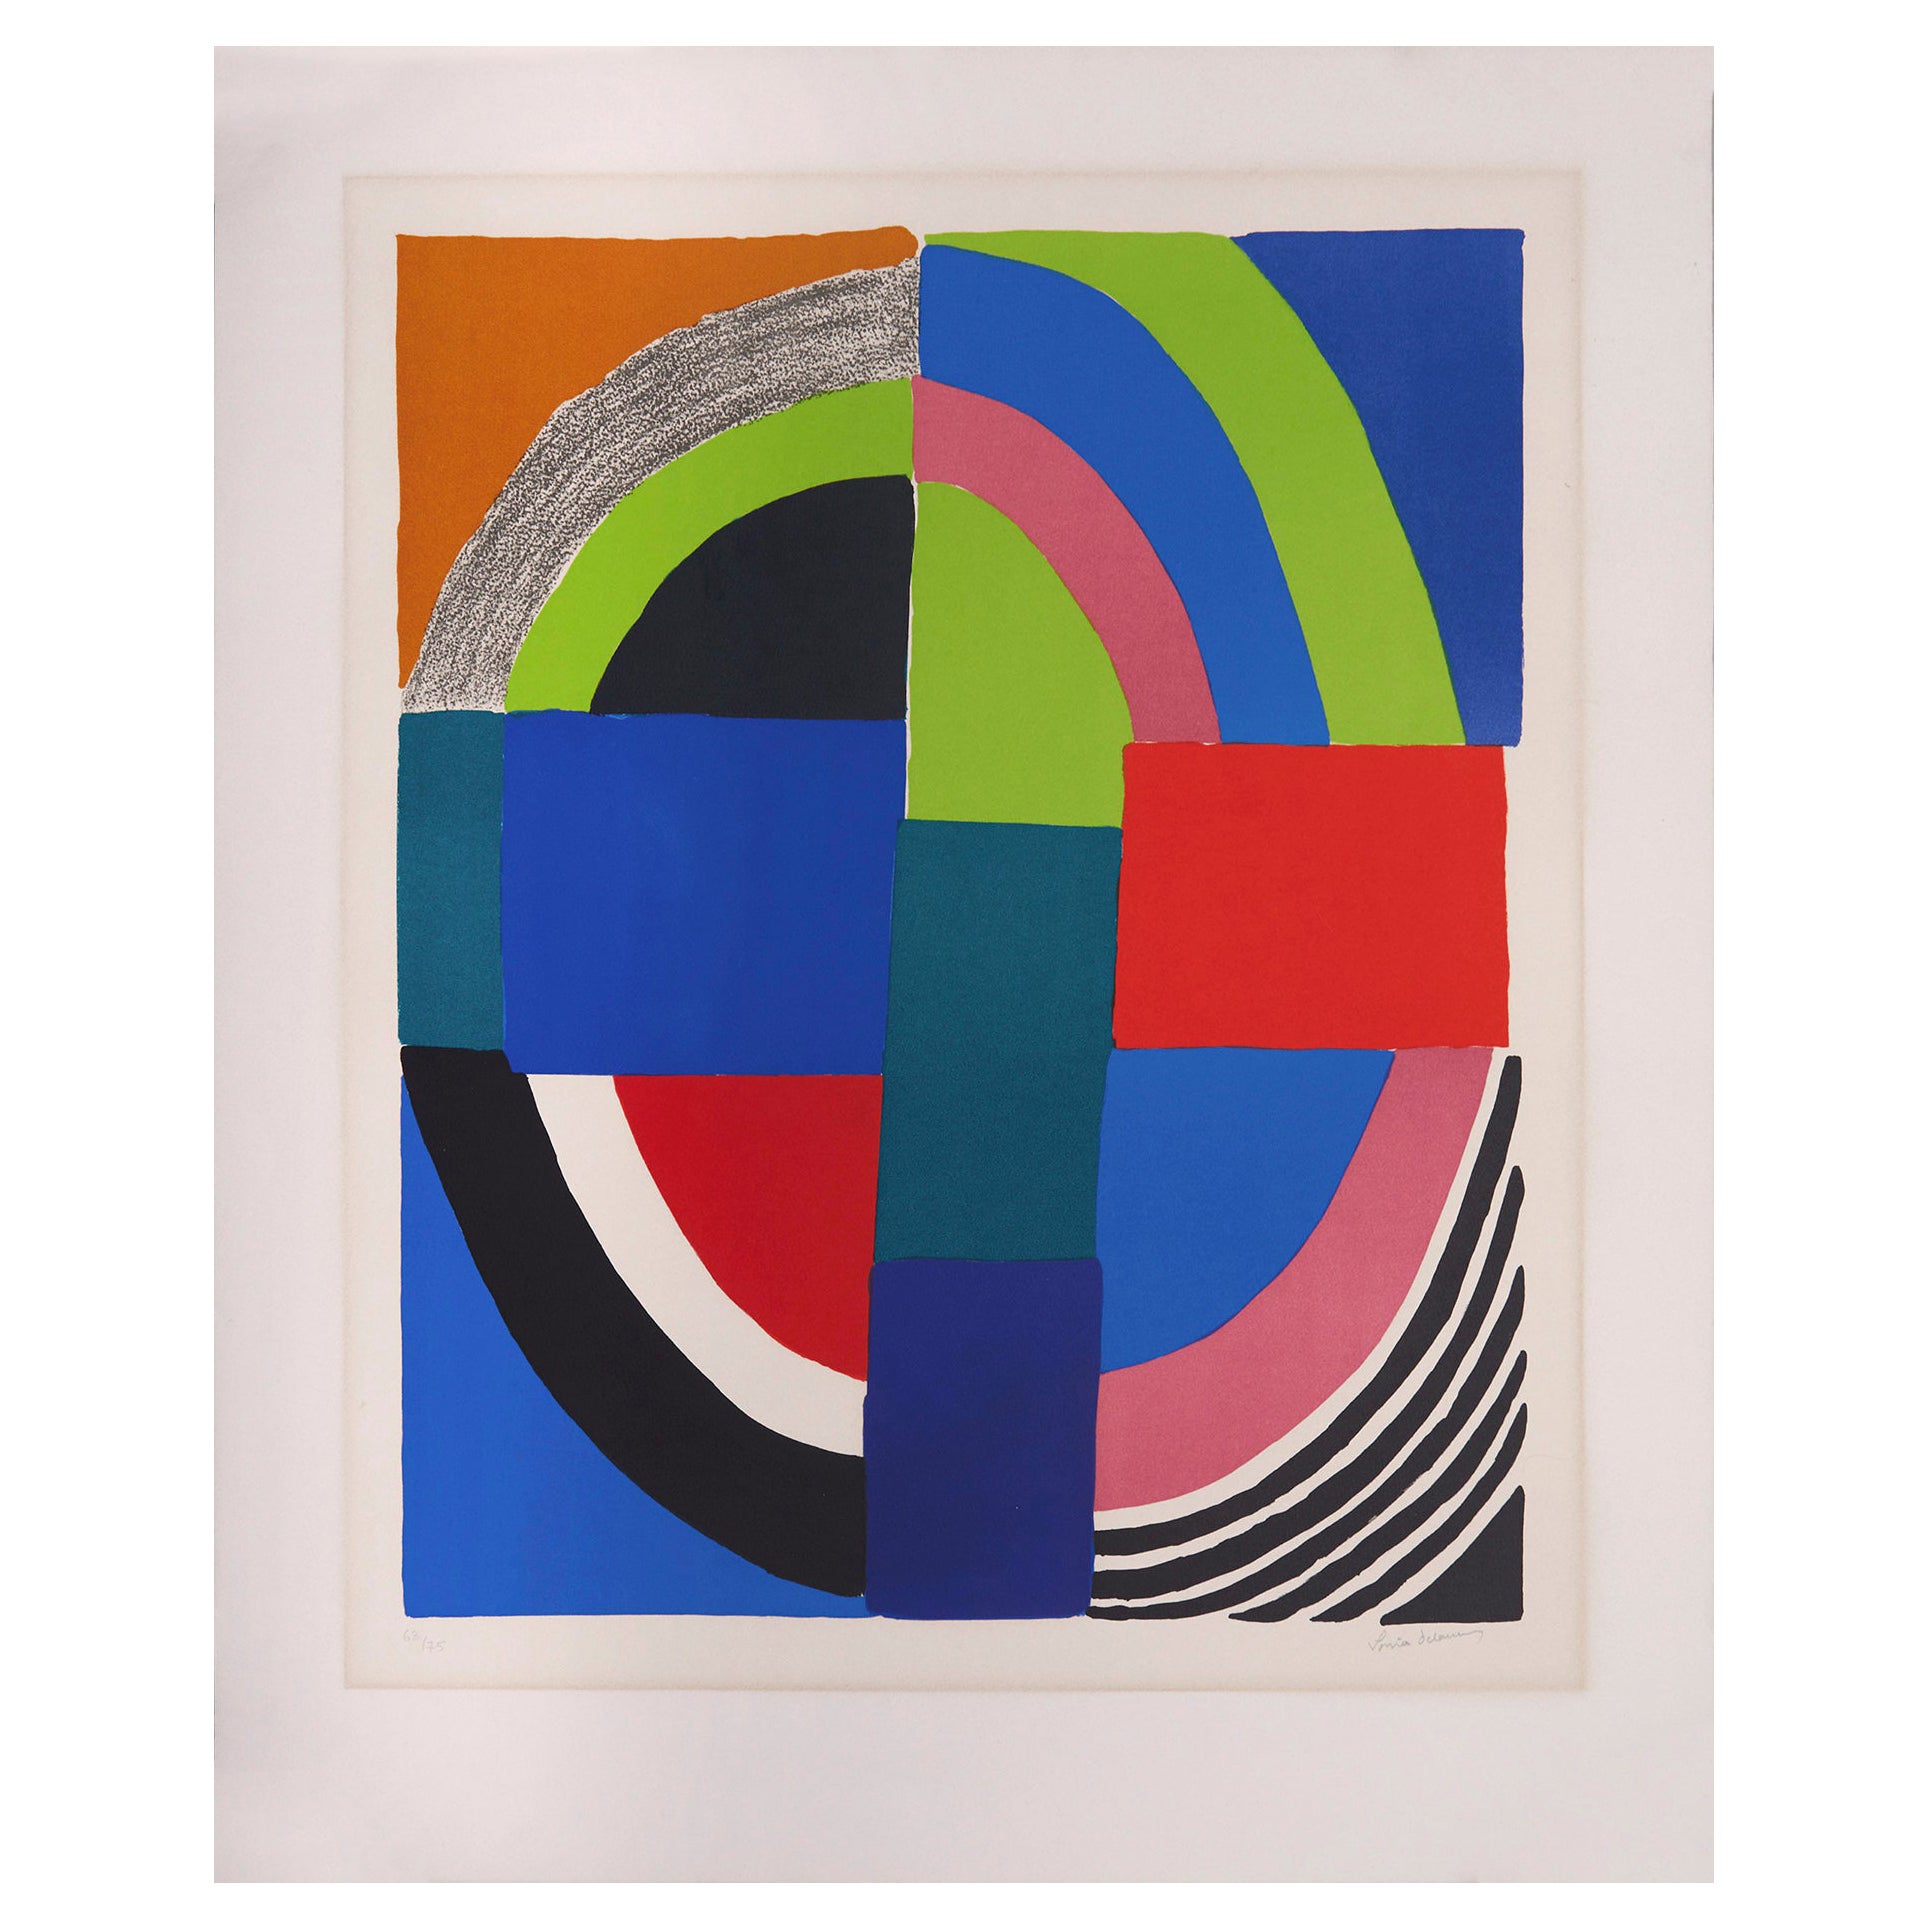 Lithography by Sonia Delaunay edition of 75 ex